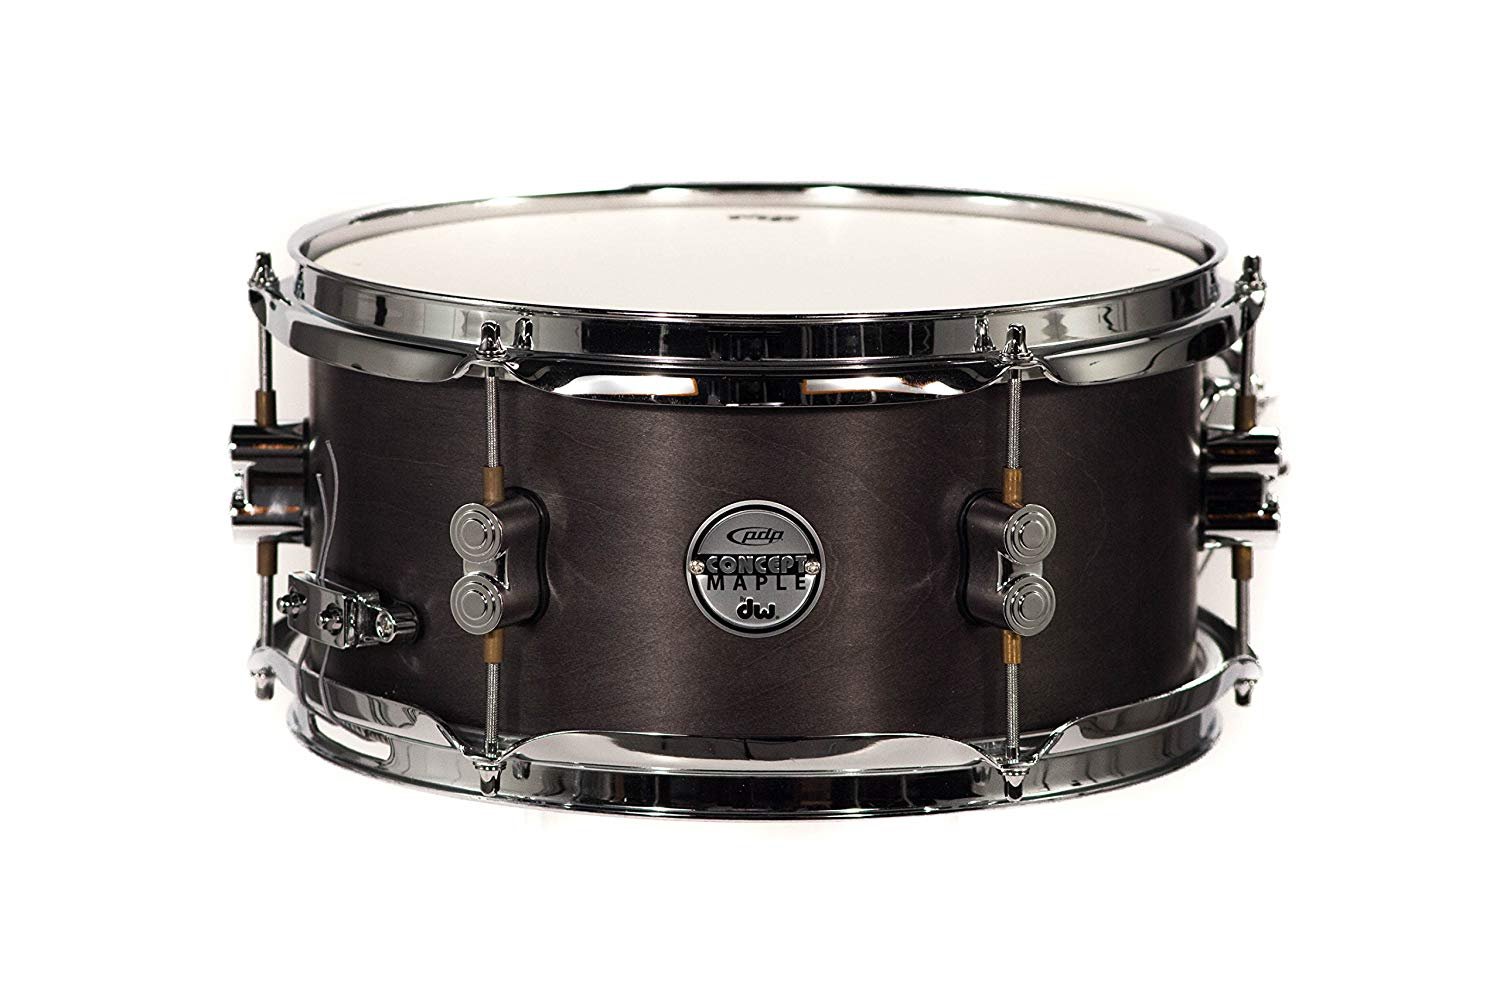 PDP By DW Black Wax Maple Snare Drum 7x13